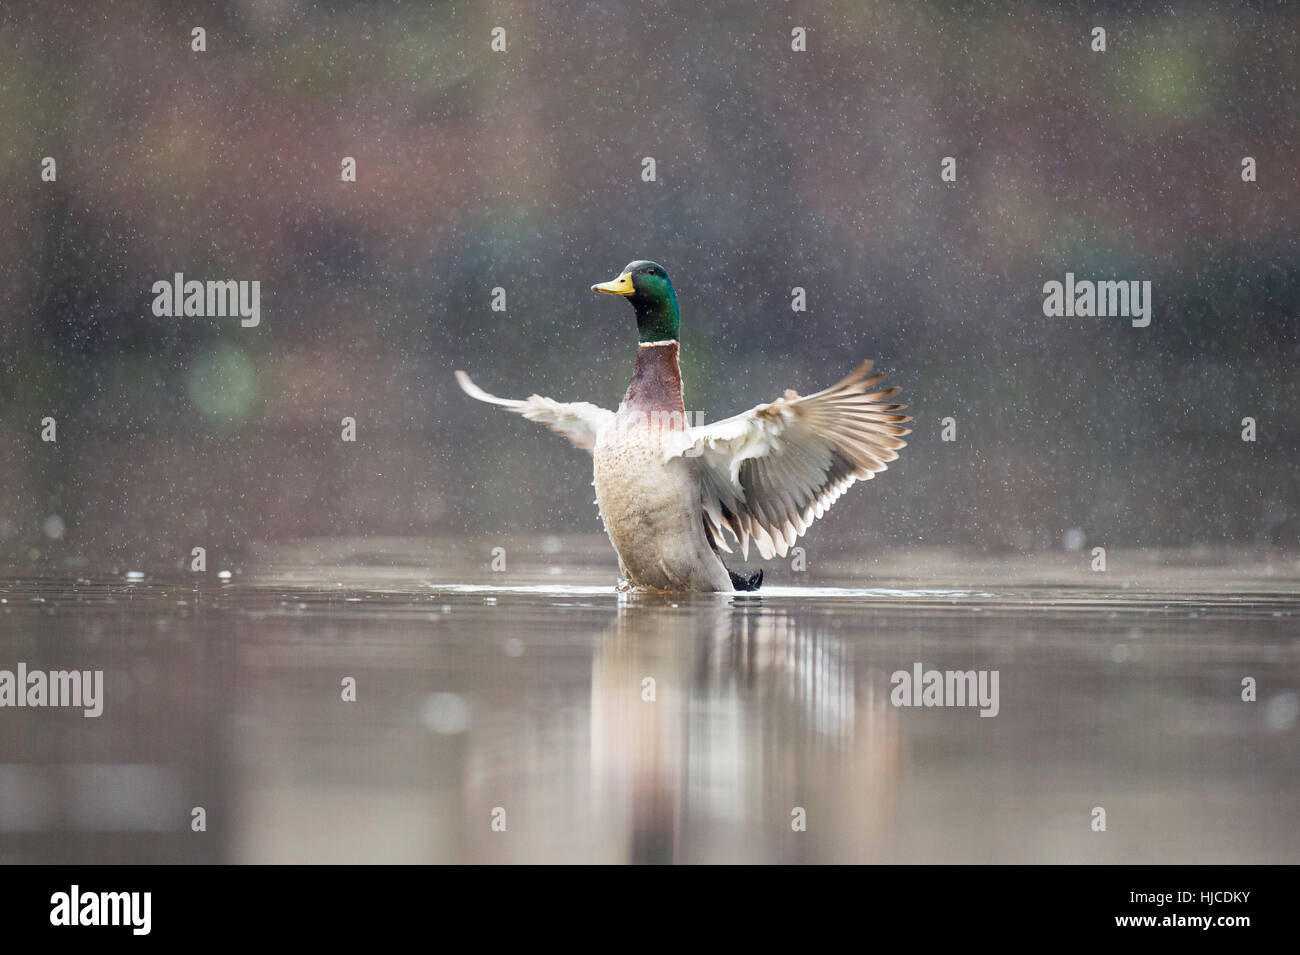 A male Mallard duck flaps its wings while sitting on the water in a spring rain. Stock Photo